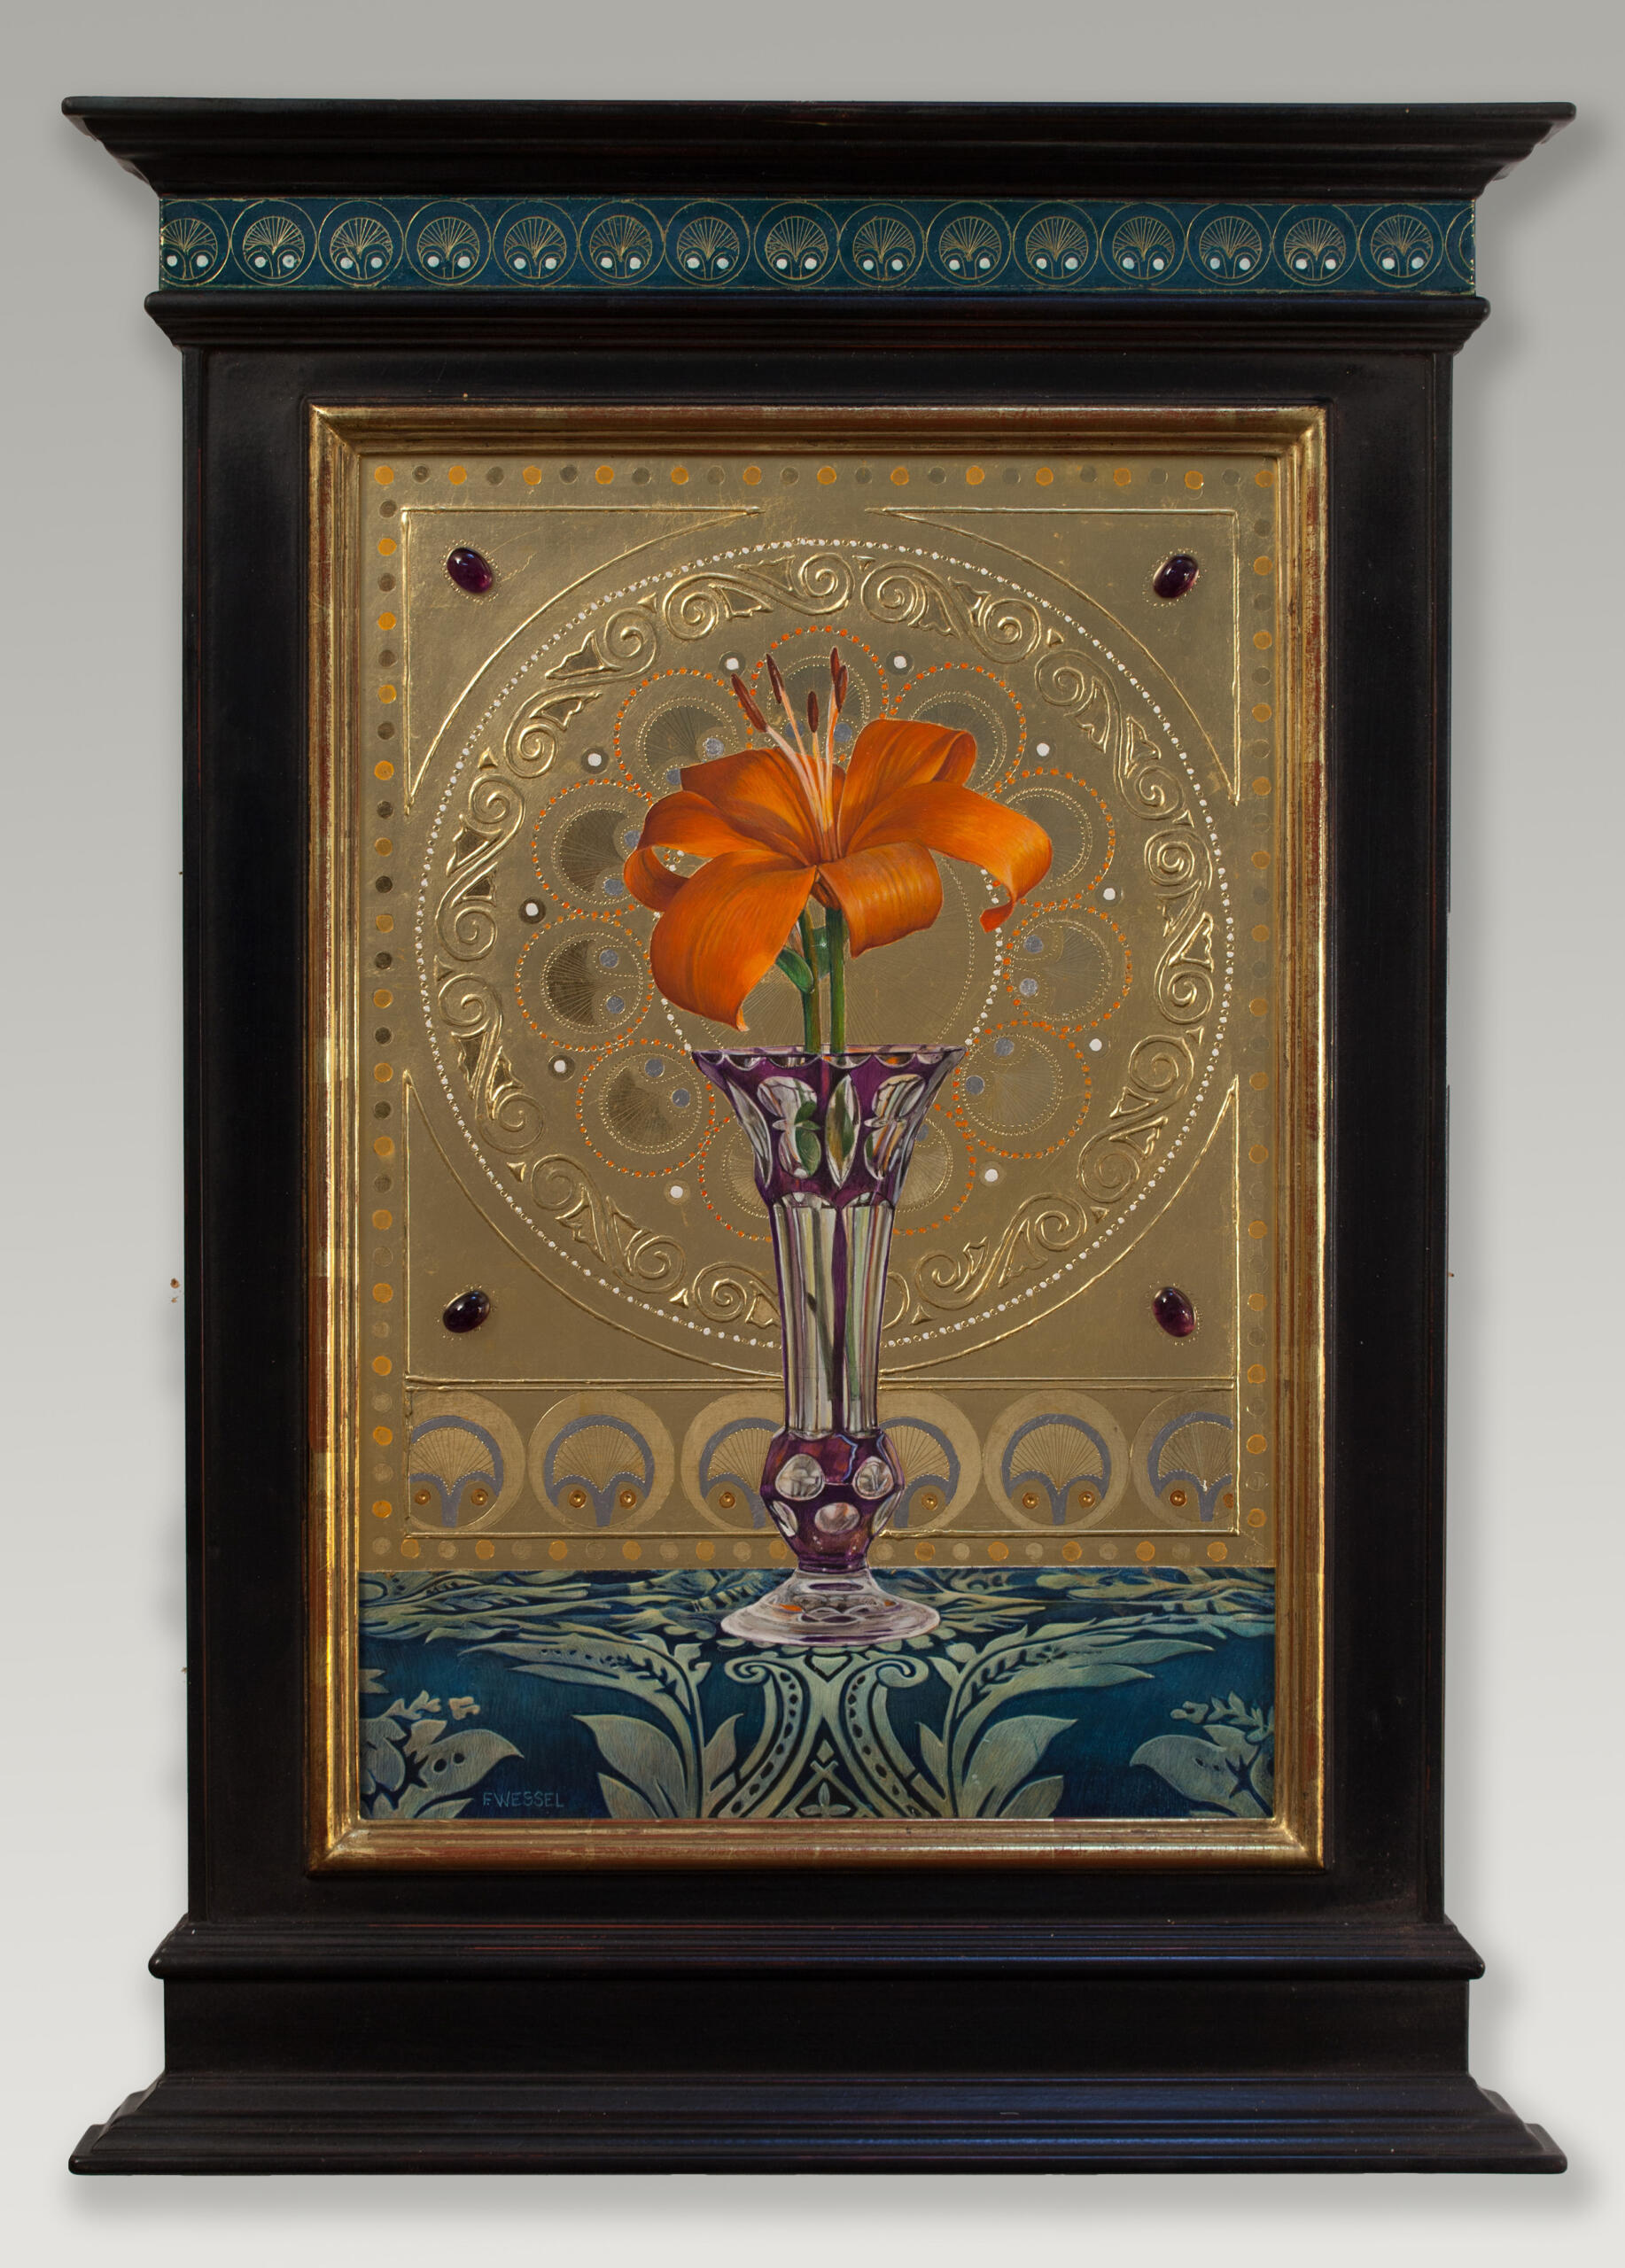 "Orange Lily (Purple Vase)"in a grandfather clock-shaped wooden frame with a horizontal golden patterned stripe near the top.